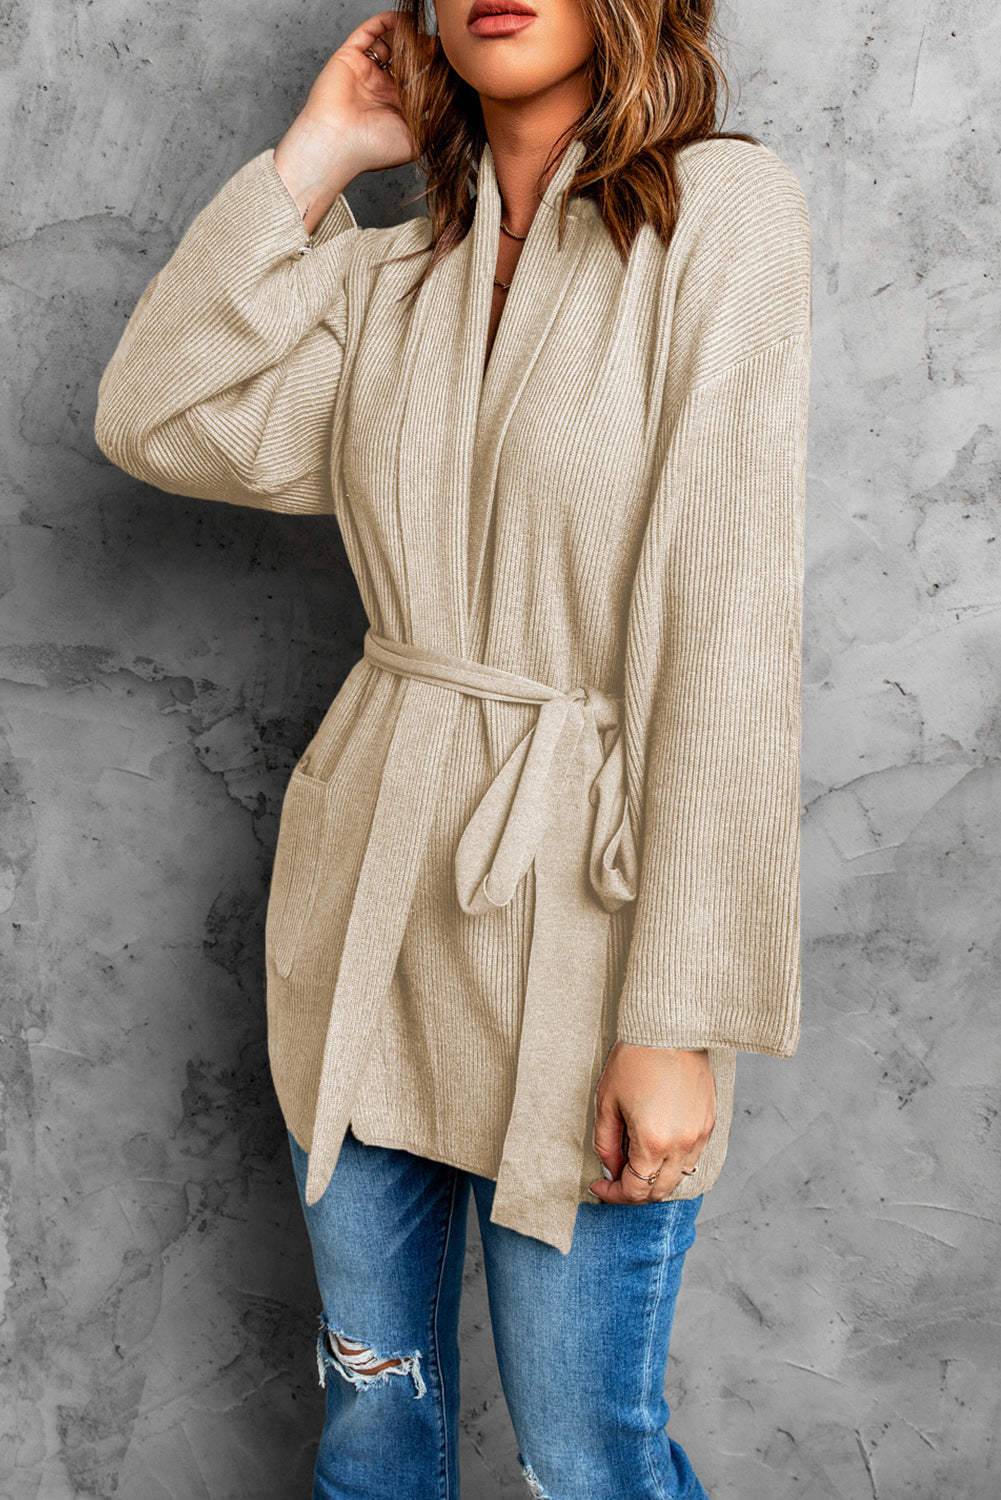 Casual Apricot Robe Style Rib Knit Pocketed Cardigan with Belt